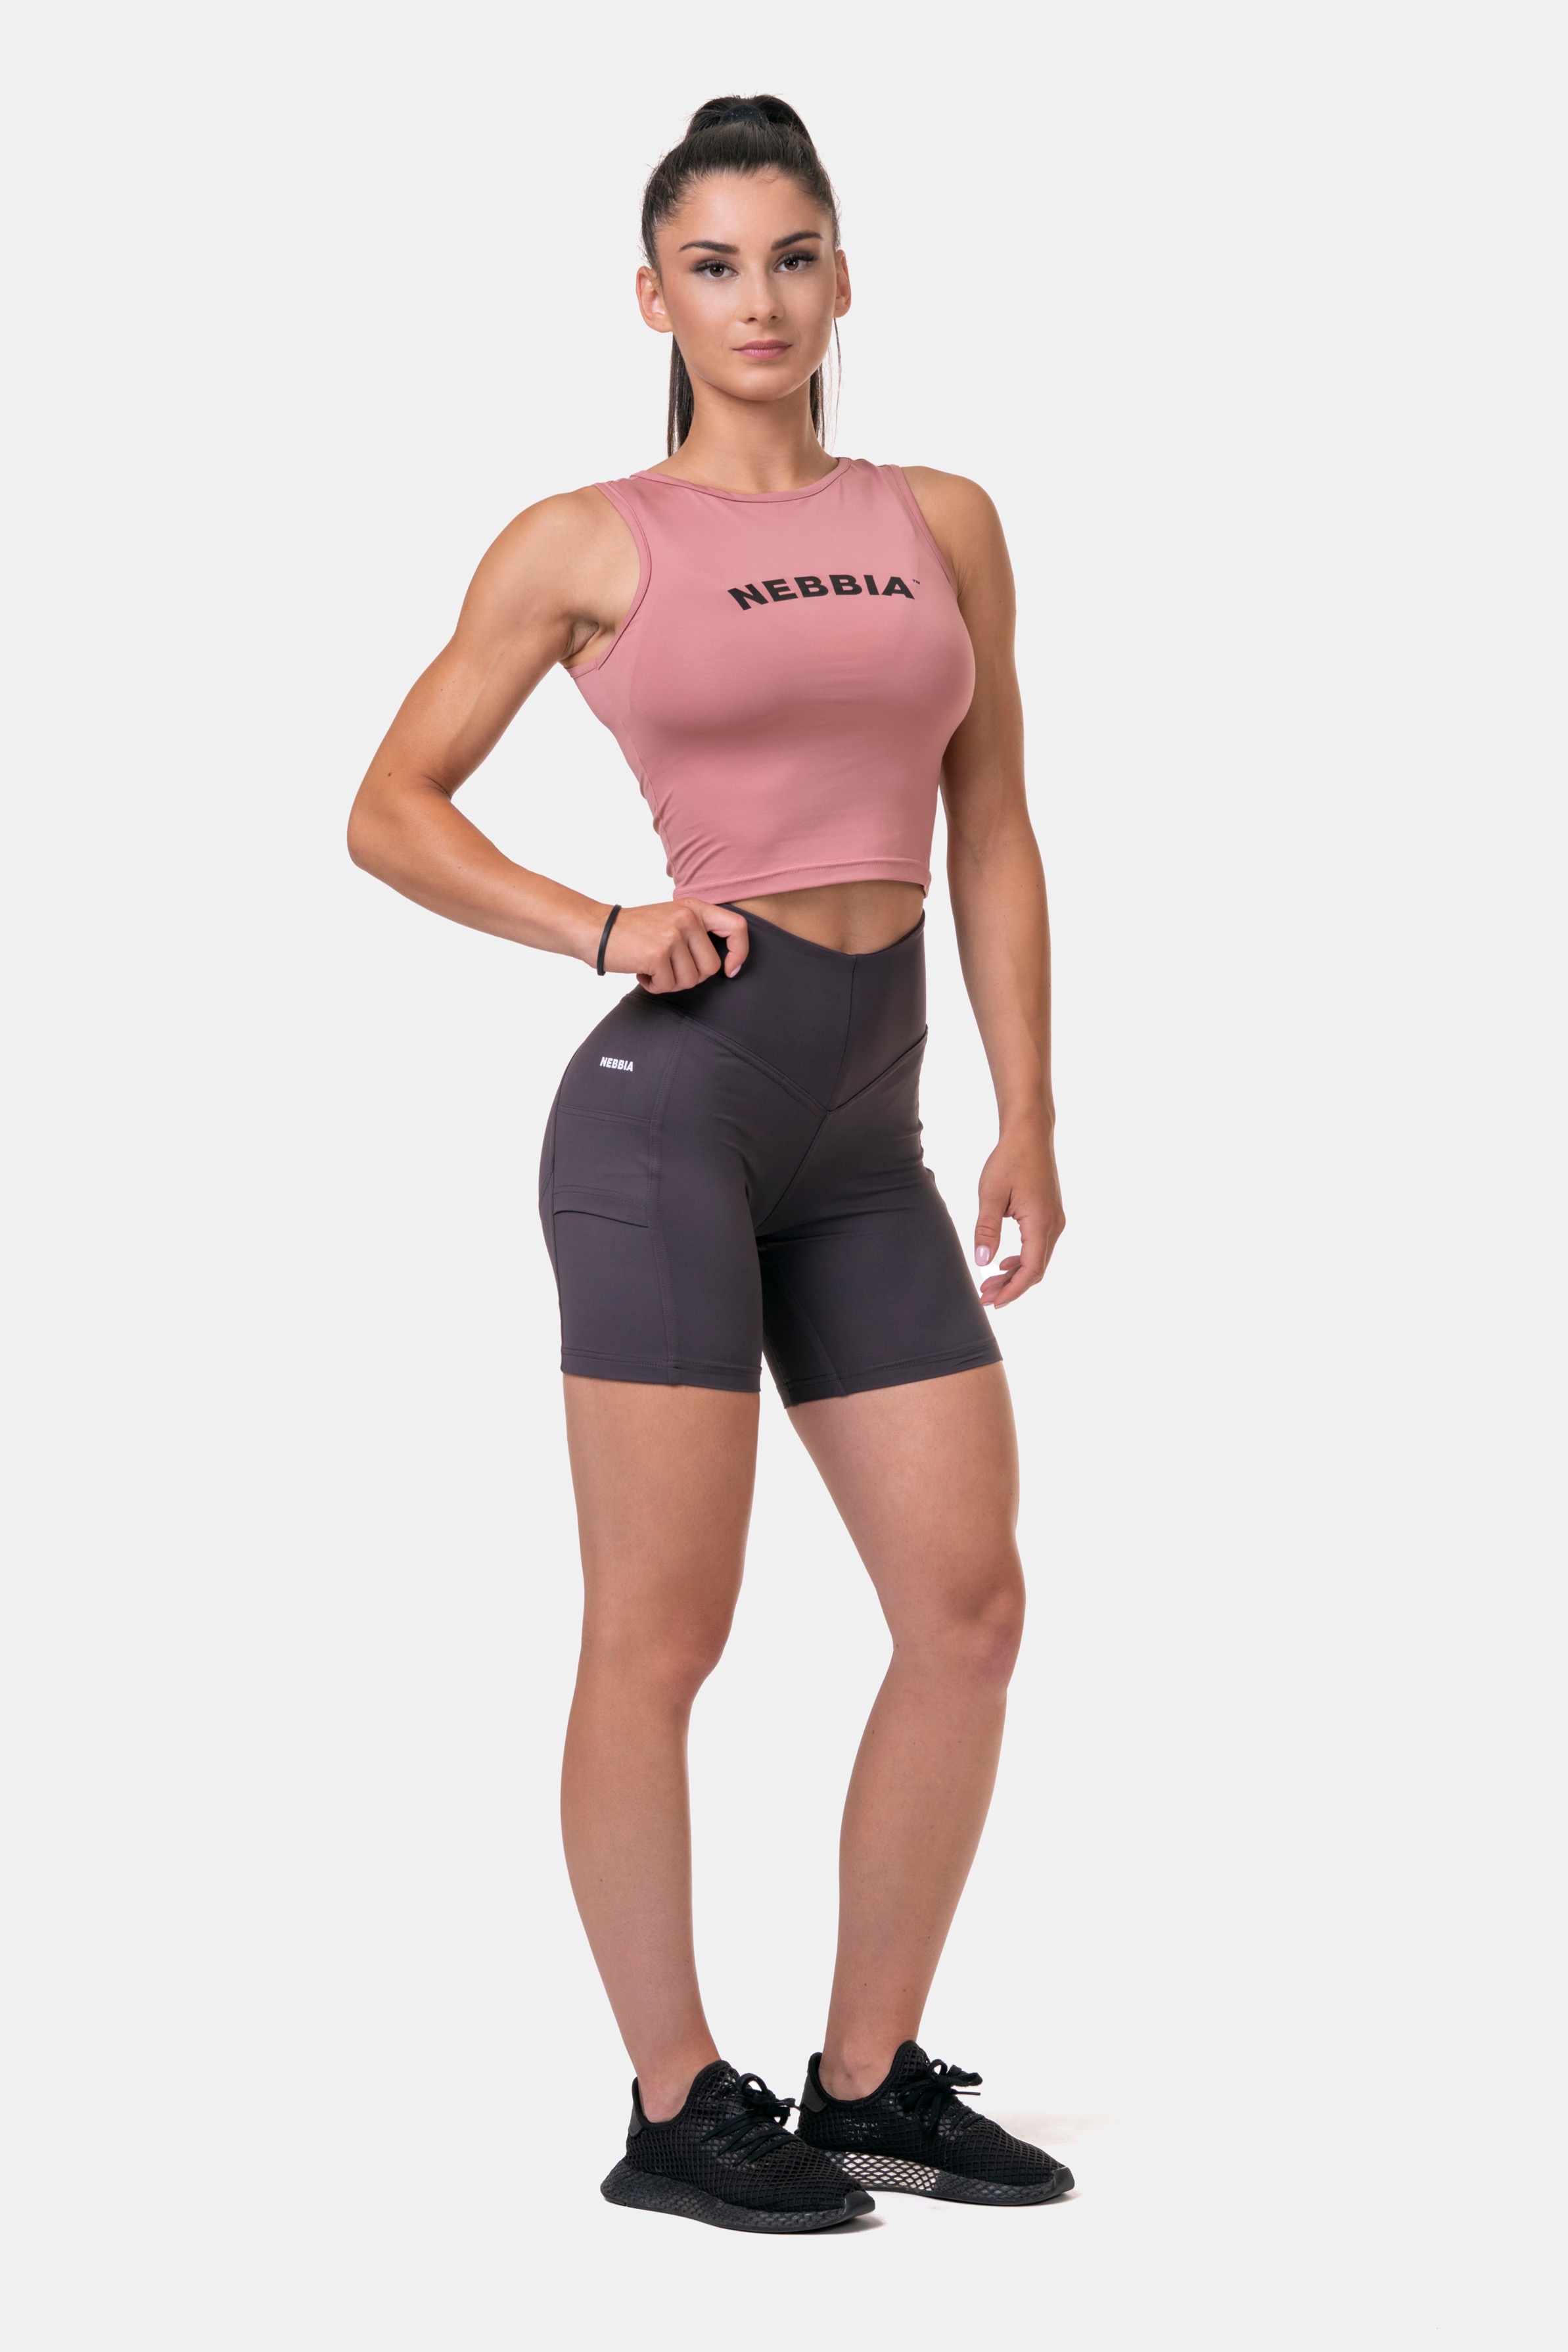 nebbia-top-fit-and-sporty-577-old-rose